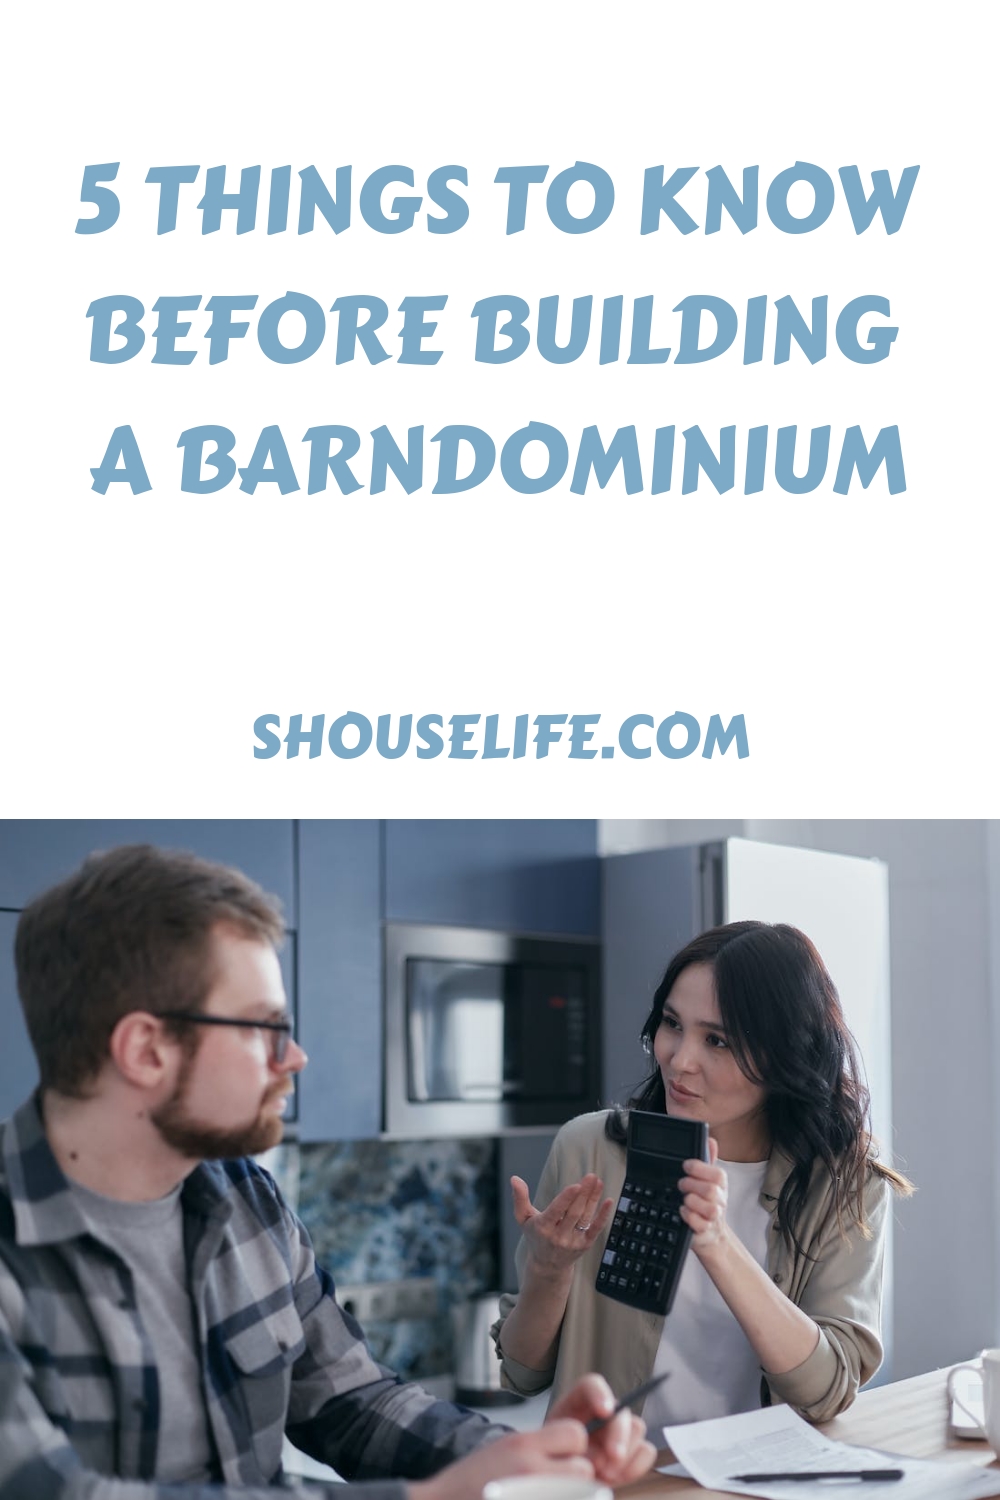 5 Things to Know Before Building a Barndominium